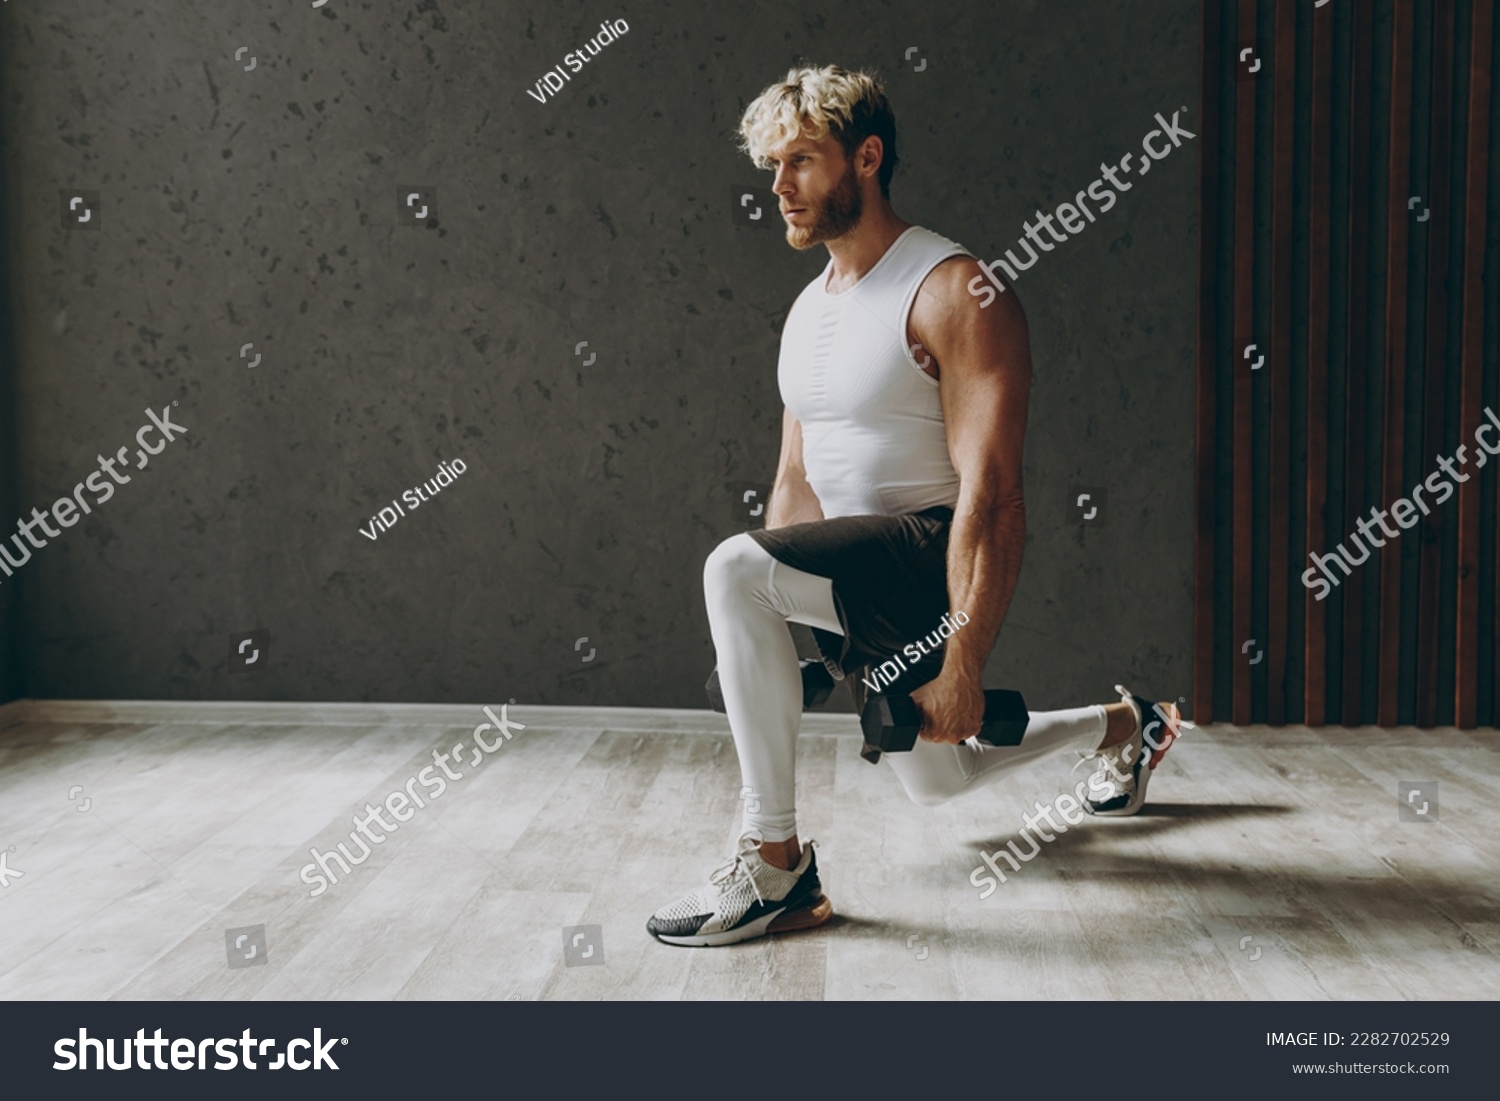 Full body side view caucasian young strong sporty athletic sportsman man wear white tank shirt black shorts lifting hold dumbbells do squat lunges warm up training indoor at gym. Workout sport concept #2282702529